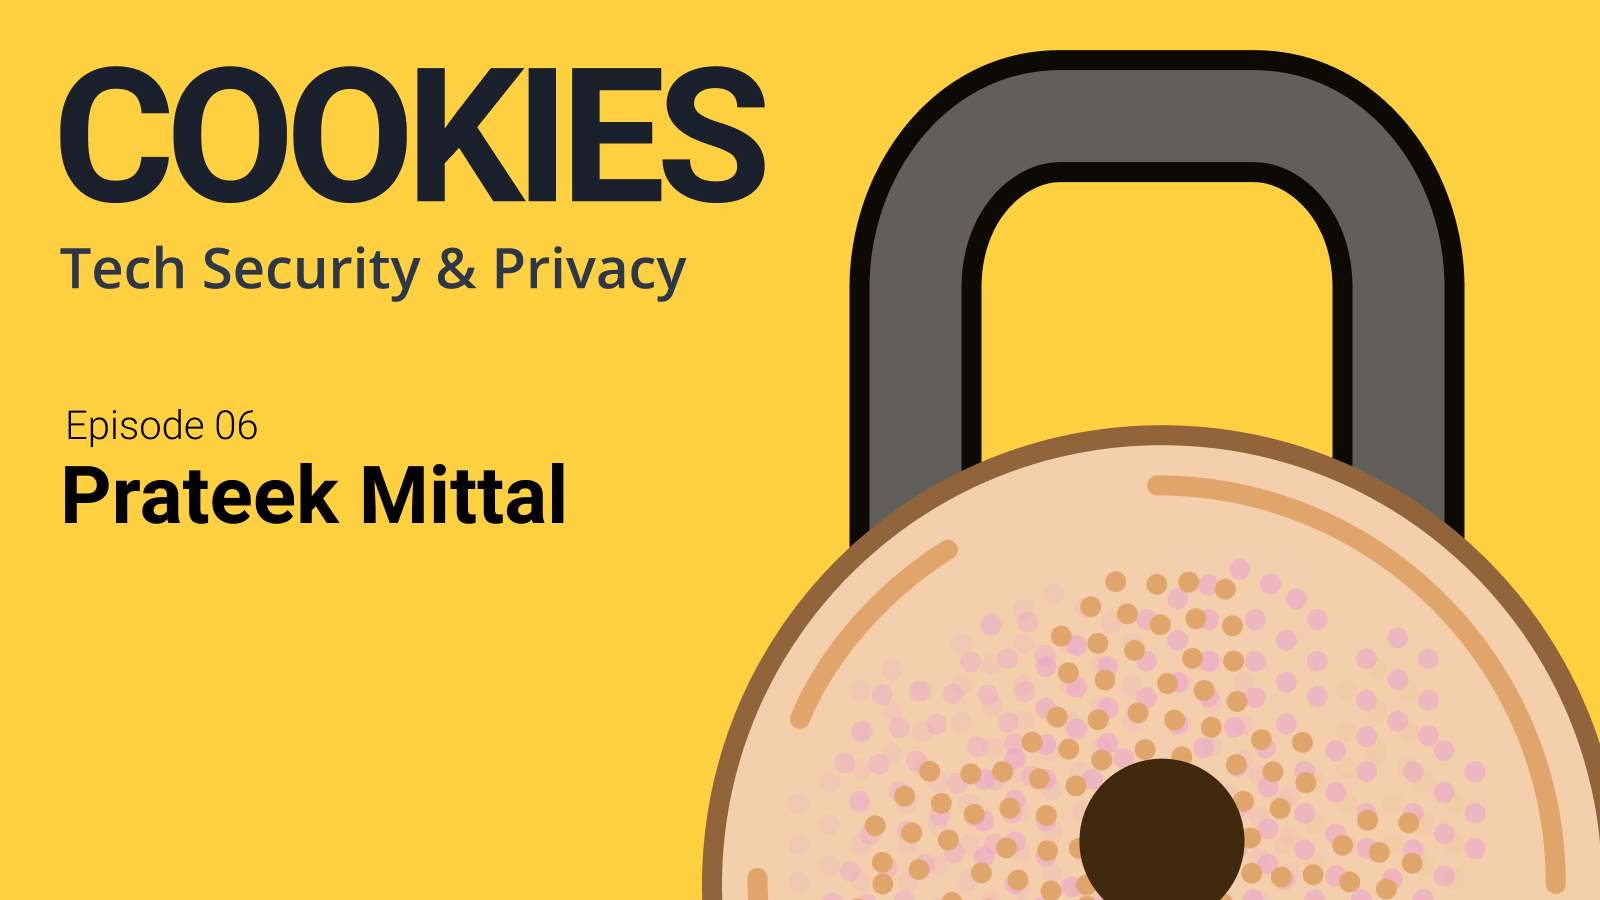 Cookies Tech Security &amp; Privacy, Episode 06, Prateek Mittal. Image of a cookie with a lock on it.